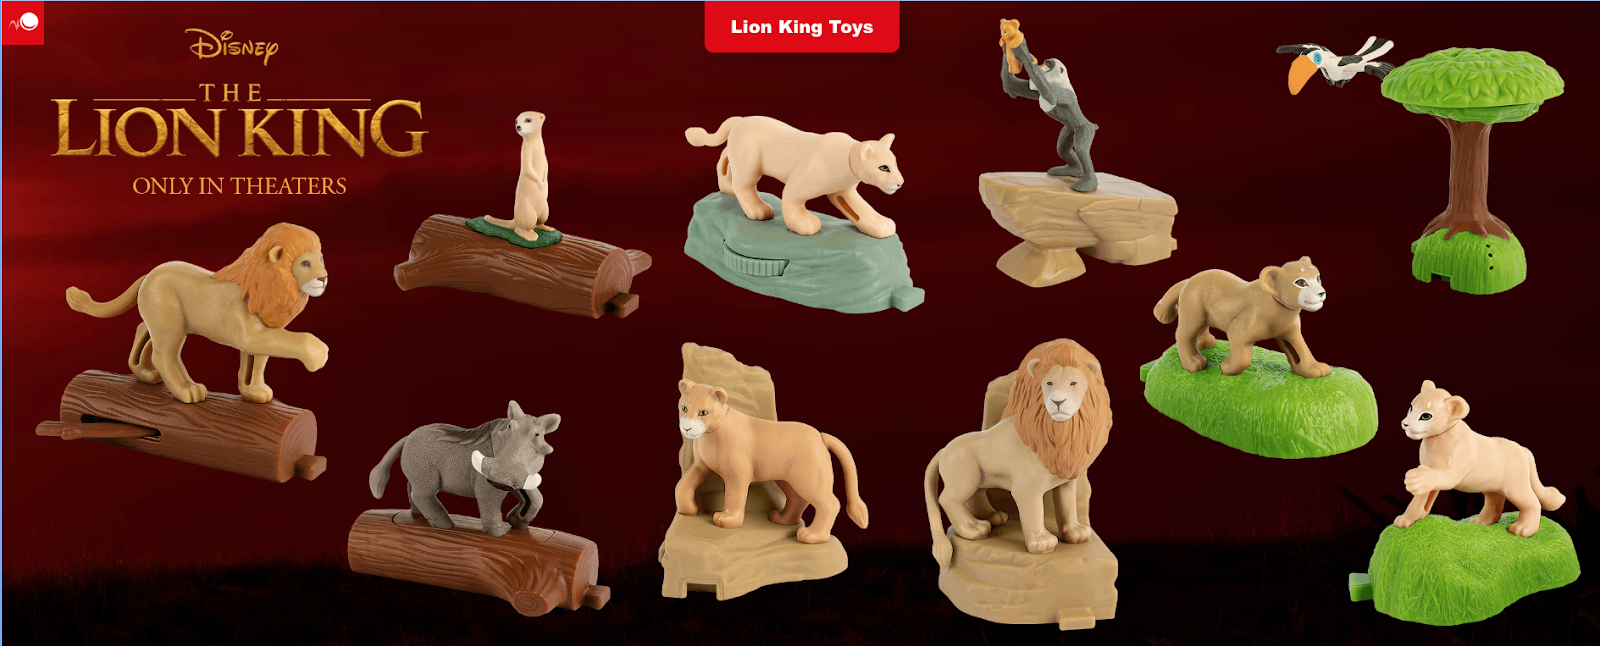 Get The COMPLETE Set! 2019 McDONALD'S DISNEY'S THE LION KING HAPPY MEAL TOYS